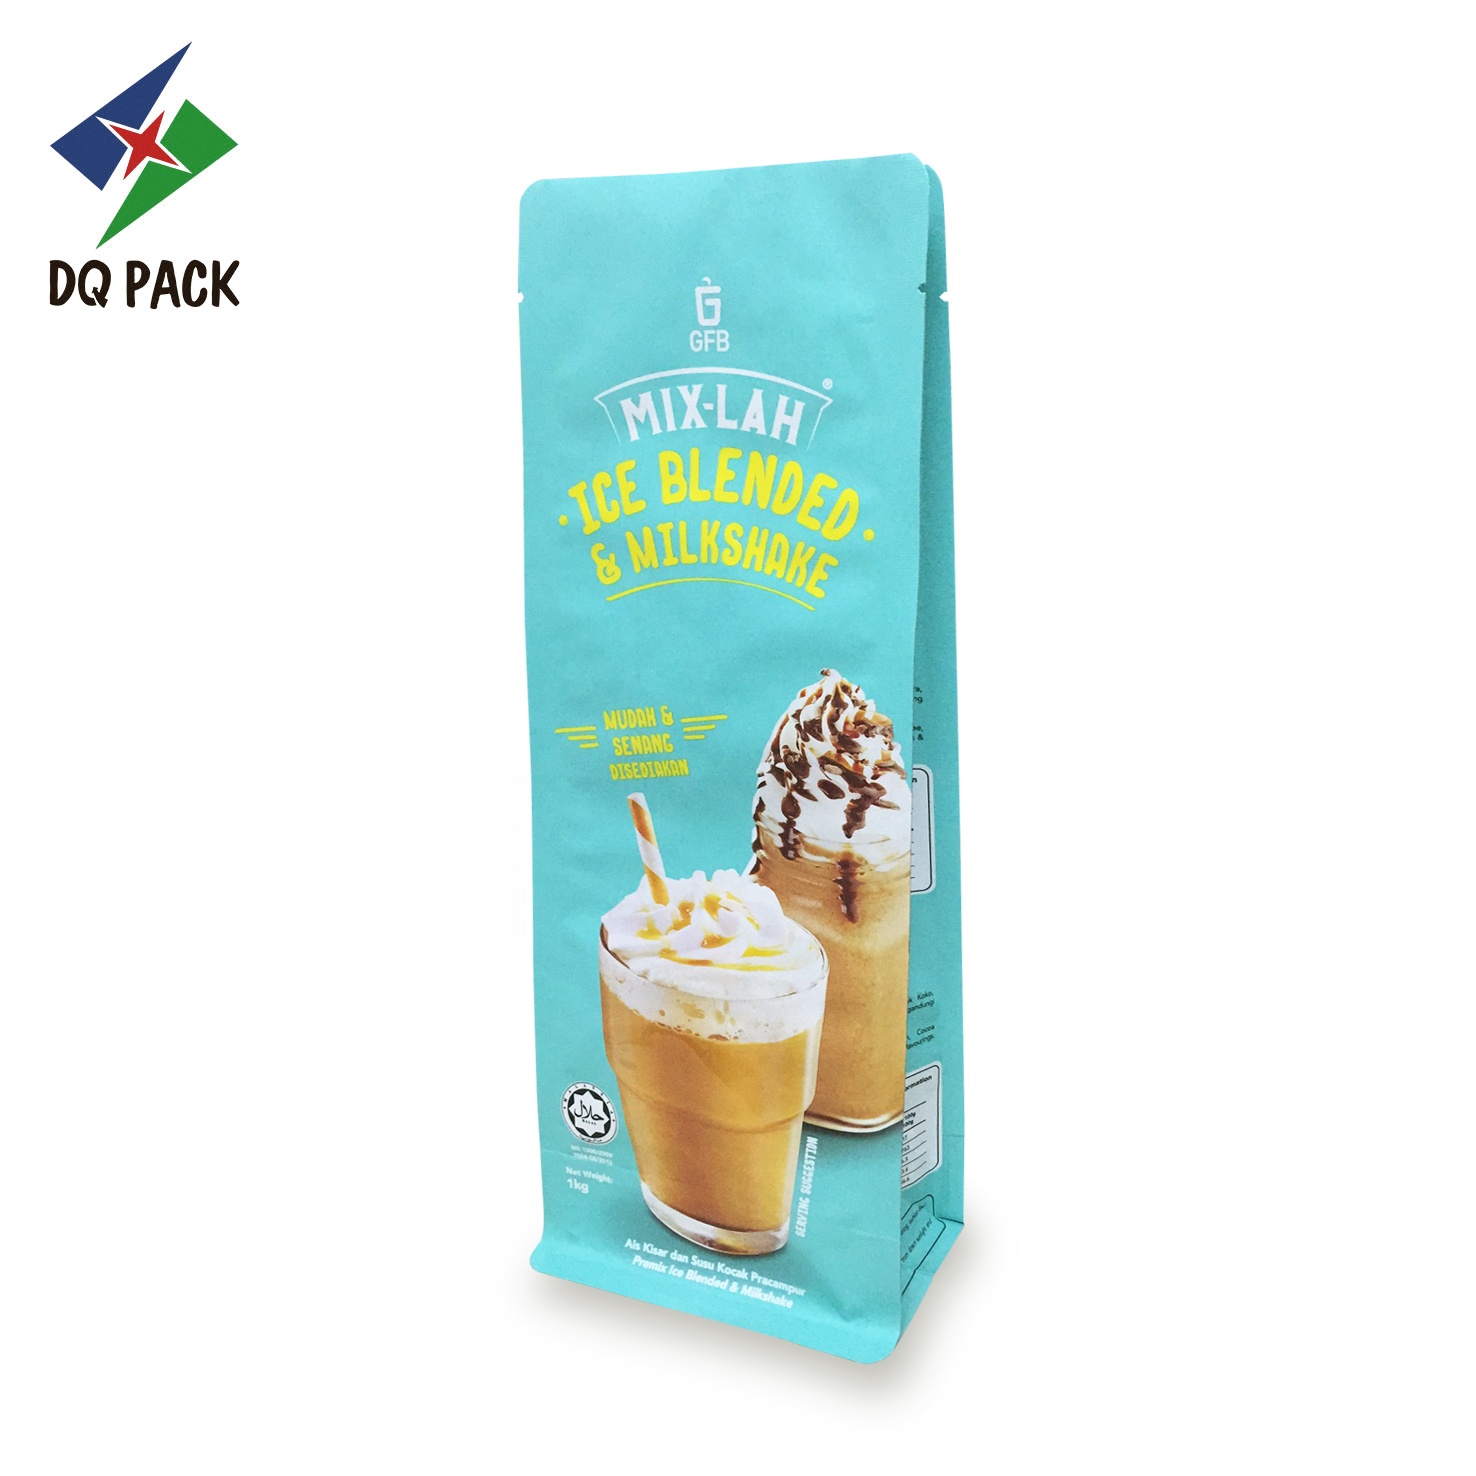 DQ PACK Custom Printed Ice Blended Plastic Packaging Bag Snack Qual Seal Bag Flat Bottom Zipper Pouch